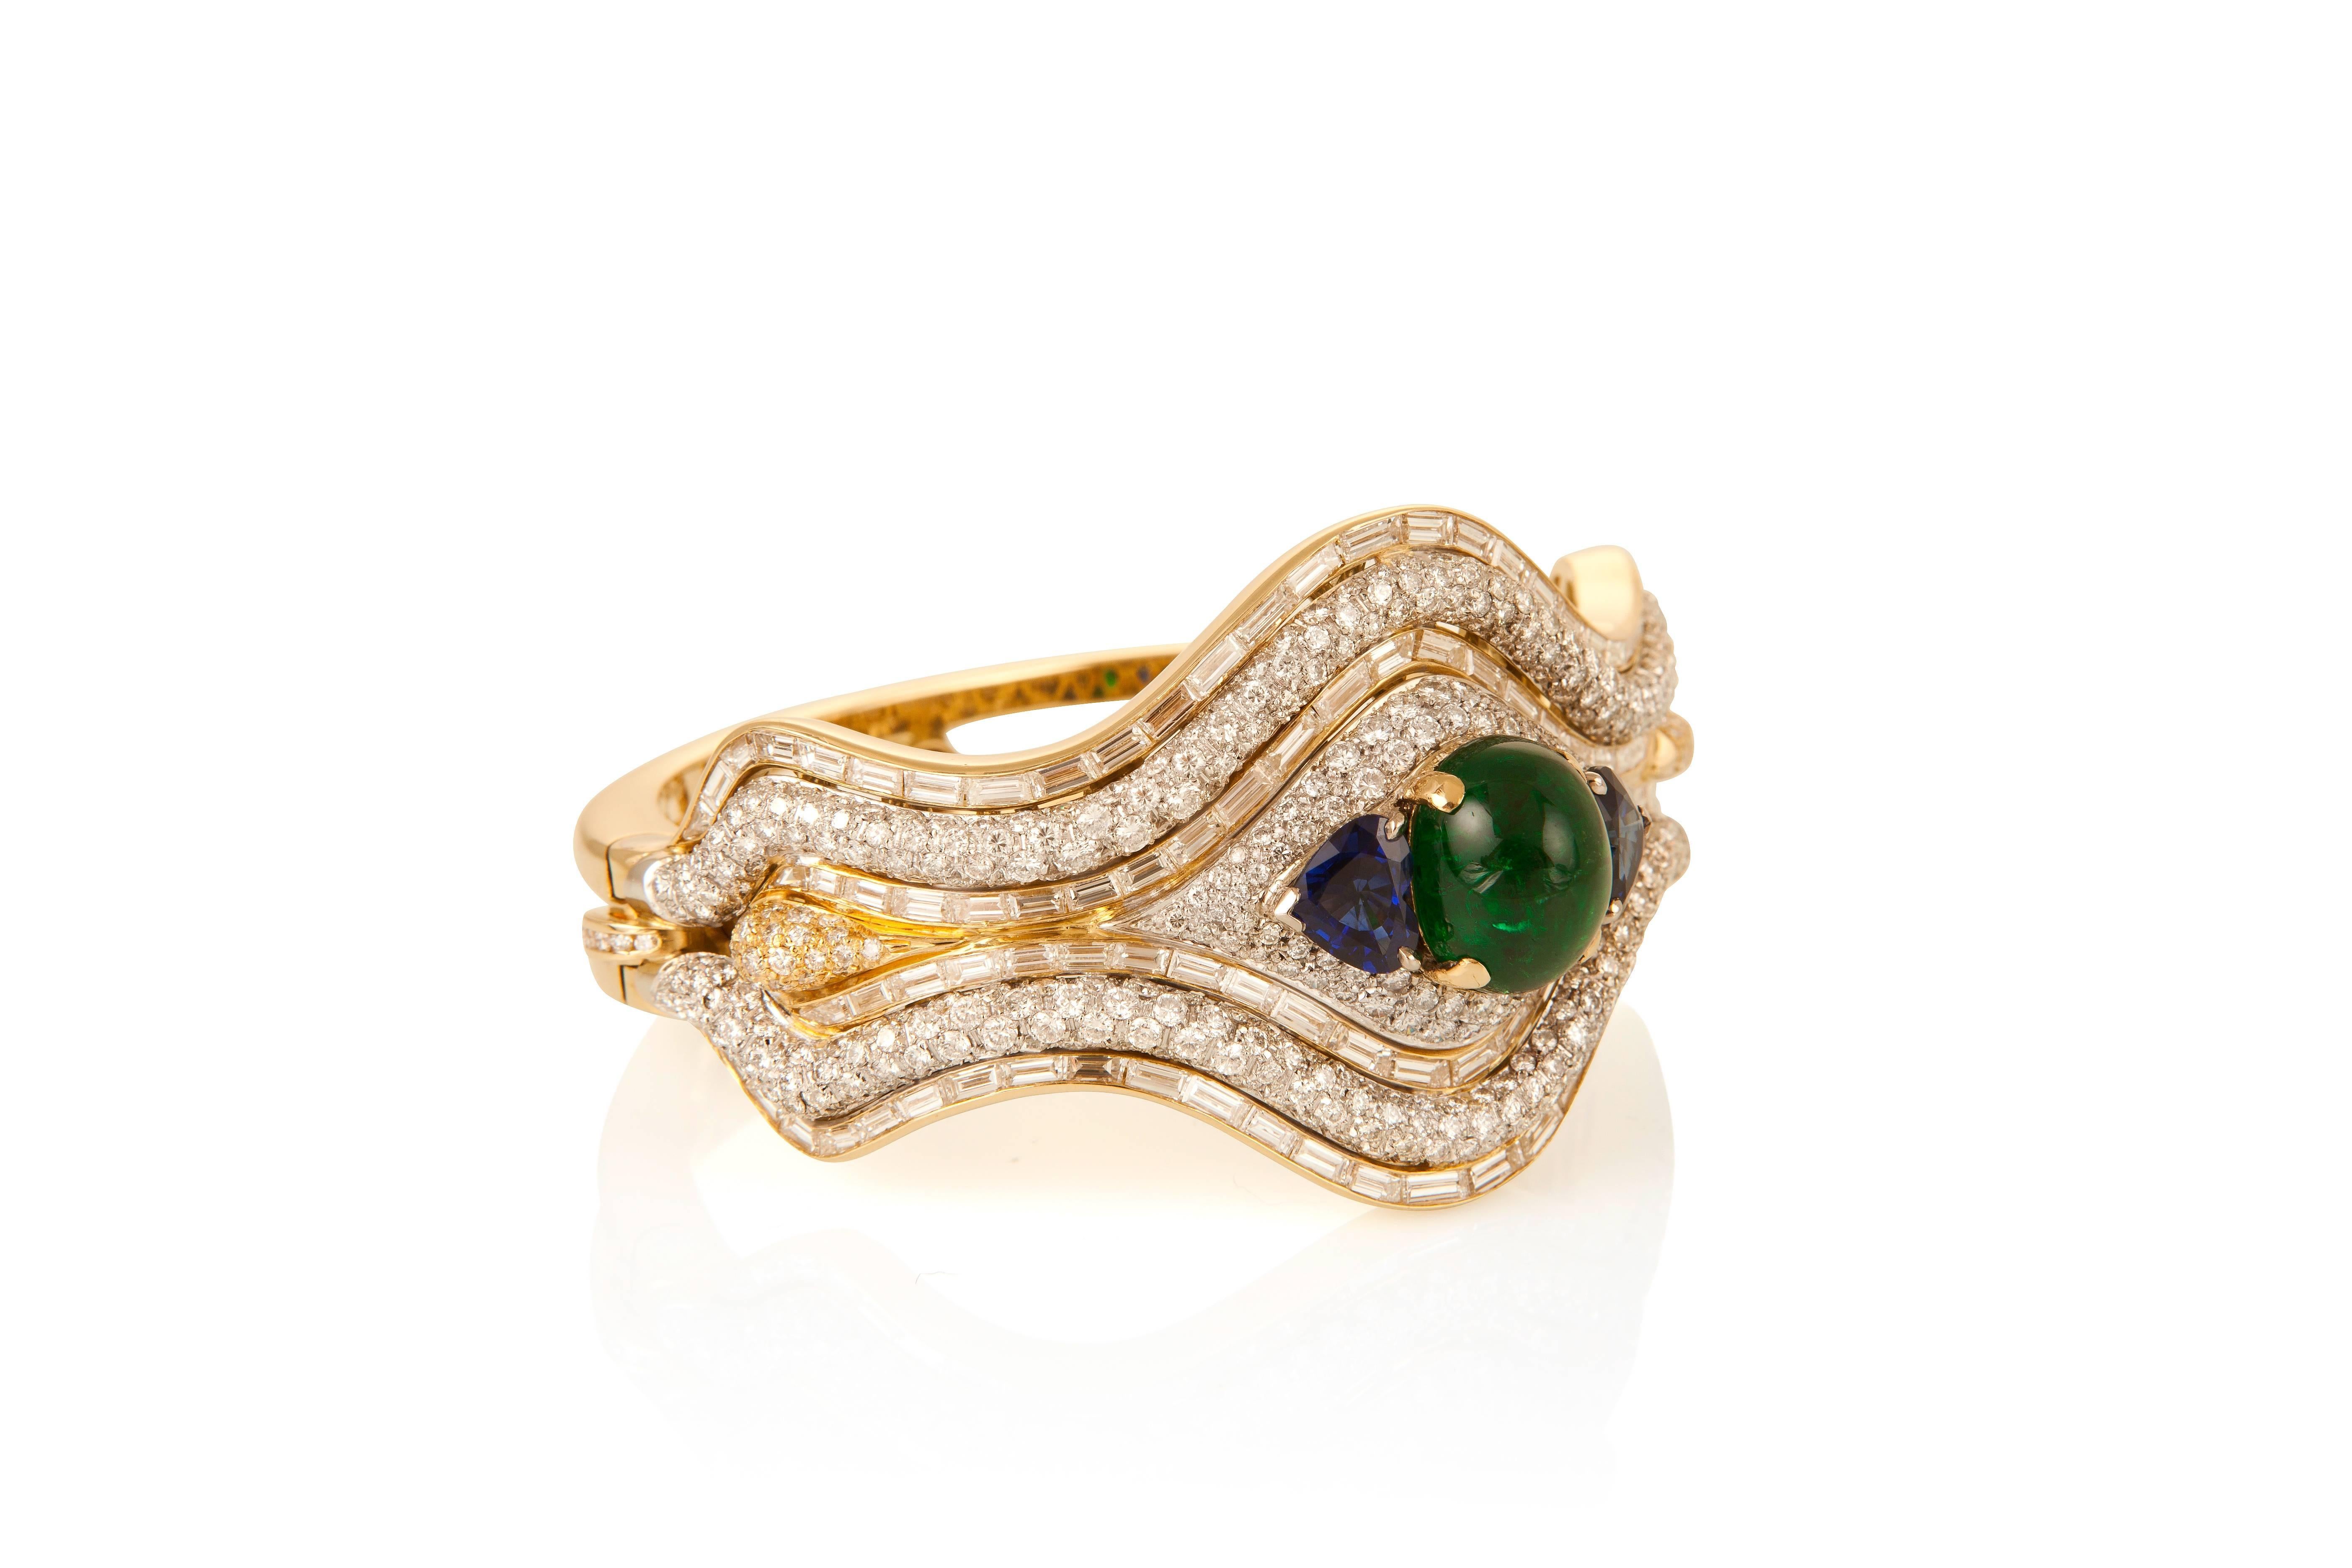 This grandly proportioned bangle features an emerald cabochon weighing 10.70 carats, two heart shape sapphires weighing 4.79 carats, and round and baguette diamonds in a flowing design, all mounted in 18 karat yellow gold.